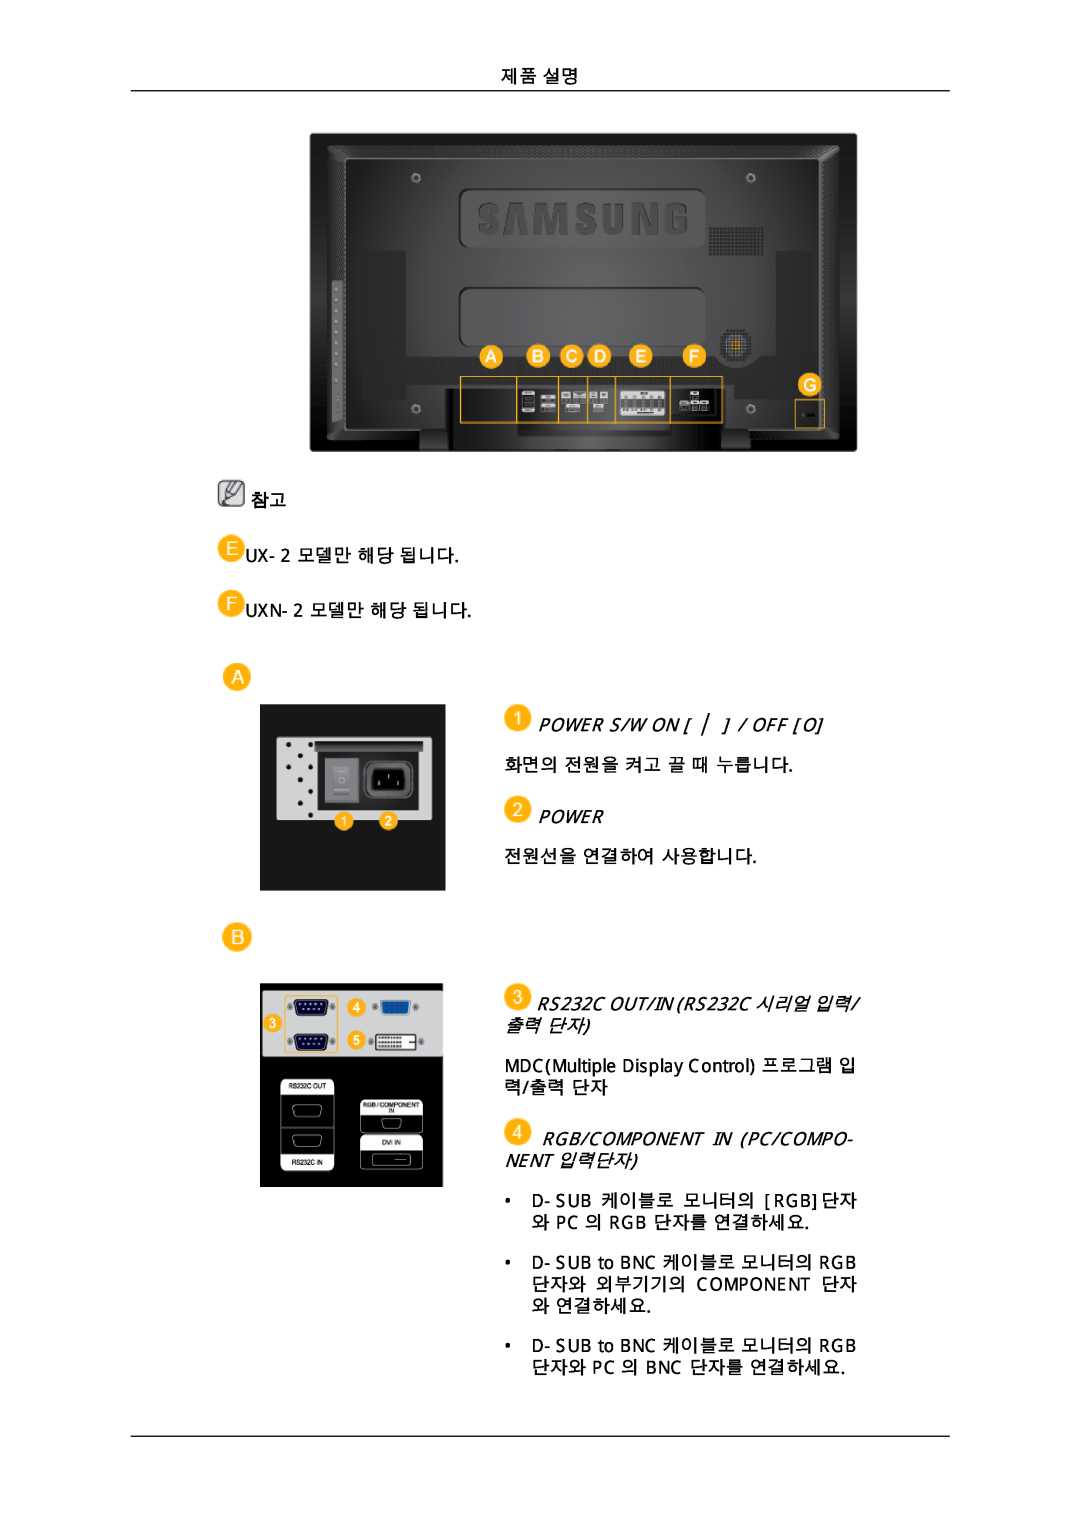 Samsung 725D quick start Power S/W On / Off O, RS232C OUT/IN RS232C 시리얼 입력/ 출력 단자, Rgb/Component In Pc/Compo Nent 입력단자 